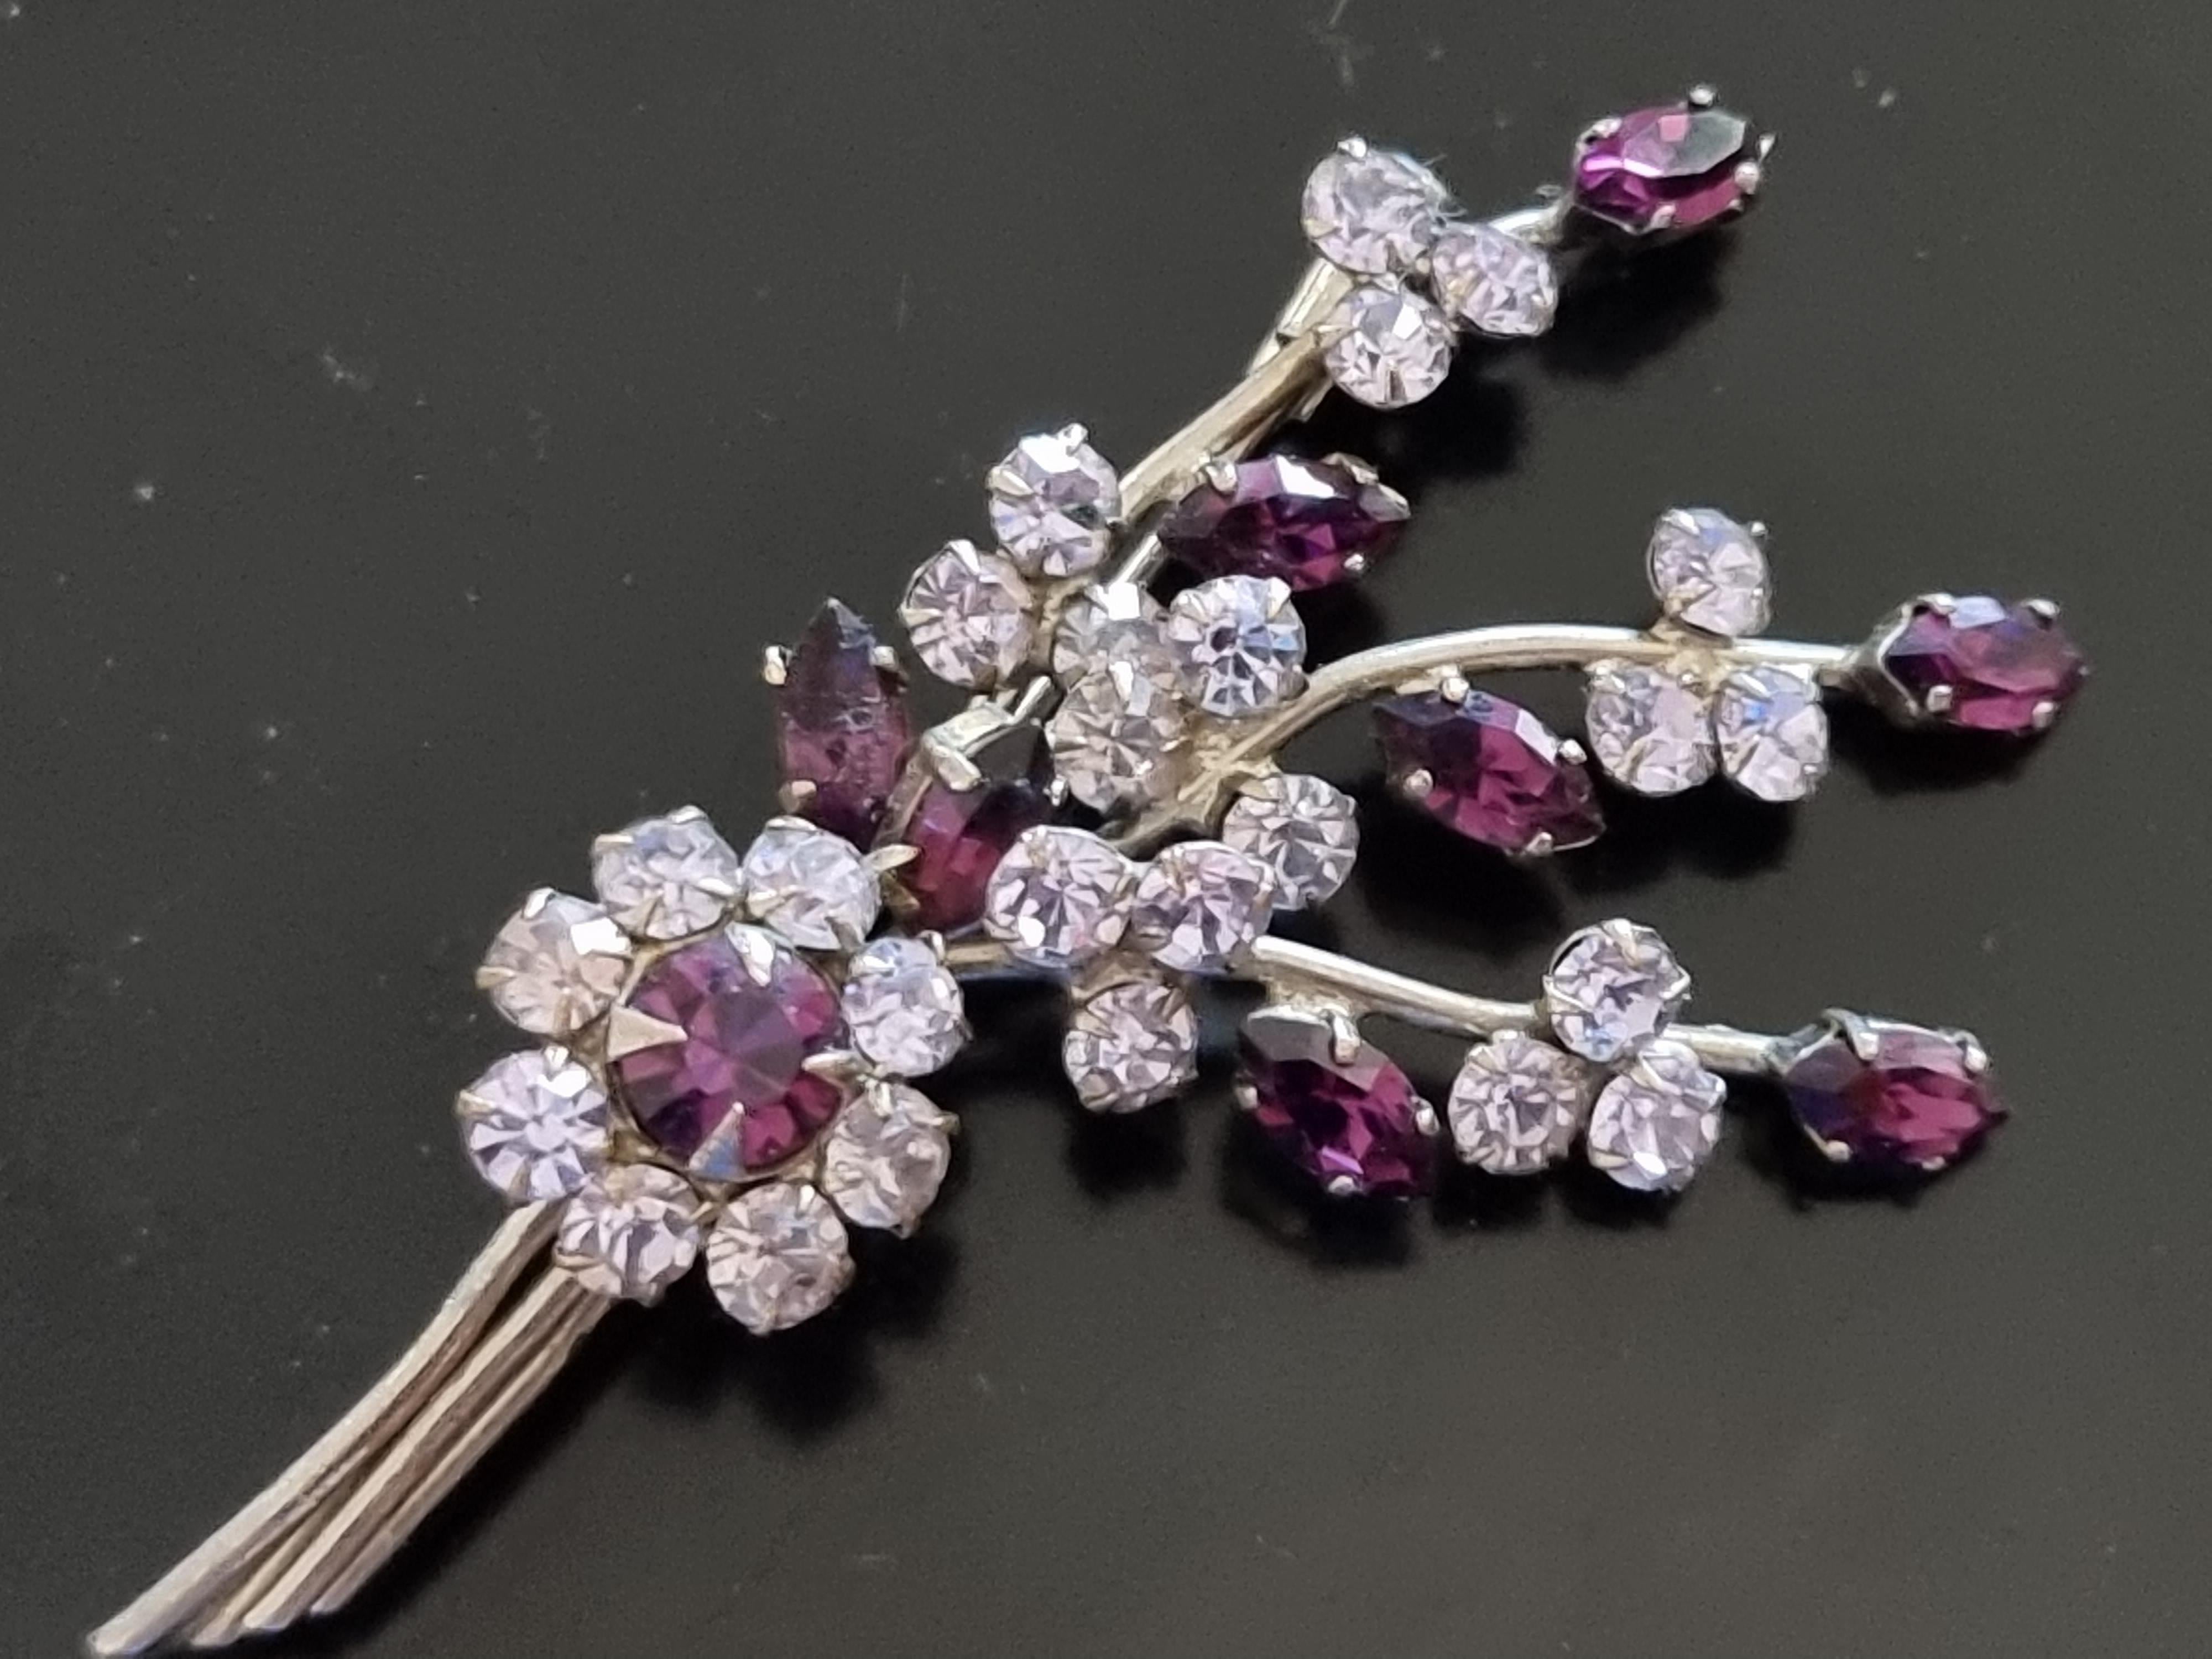 Magnificent old BROOCH:
vintage 50's,
in silver metal, glass rhinestones,
by High Fashion designer ROGER Jean Pierre,
Brooch dimensions 6.8 x 3.8 cm,
good condition.

The French jeweler and designer, famous parurier Roger Jean Pierre has been